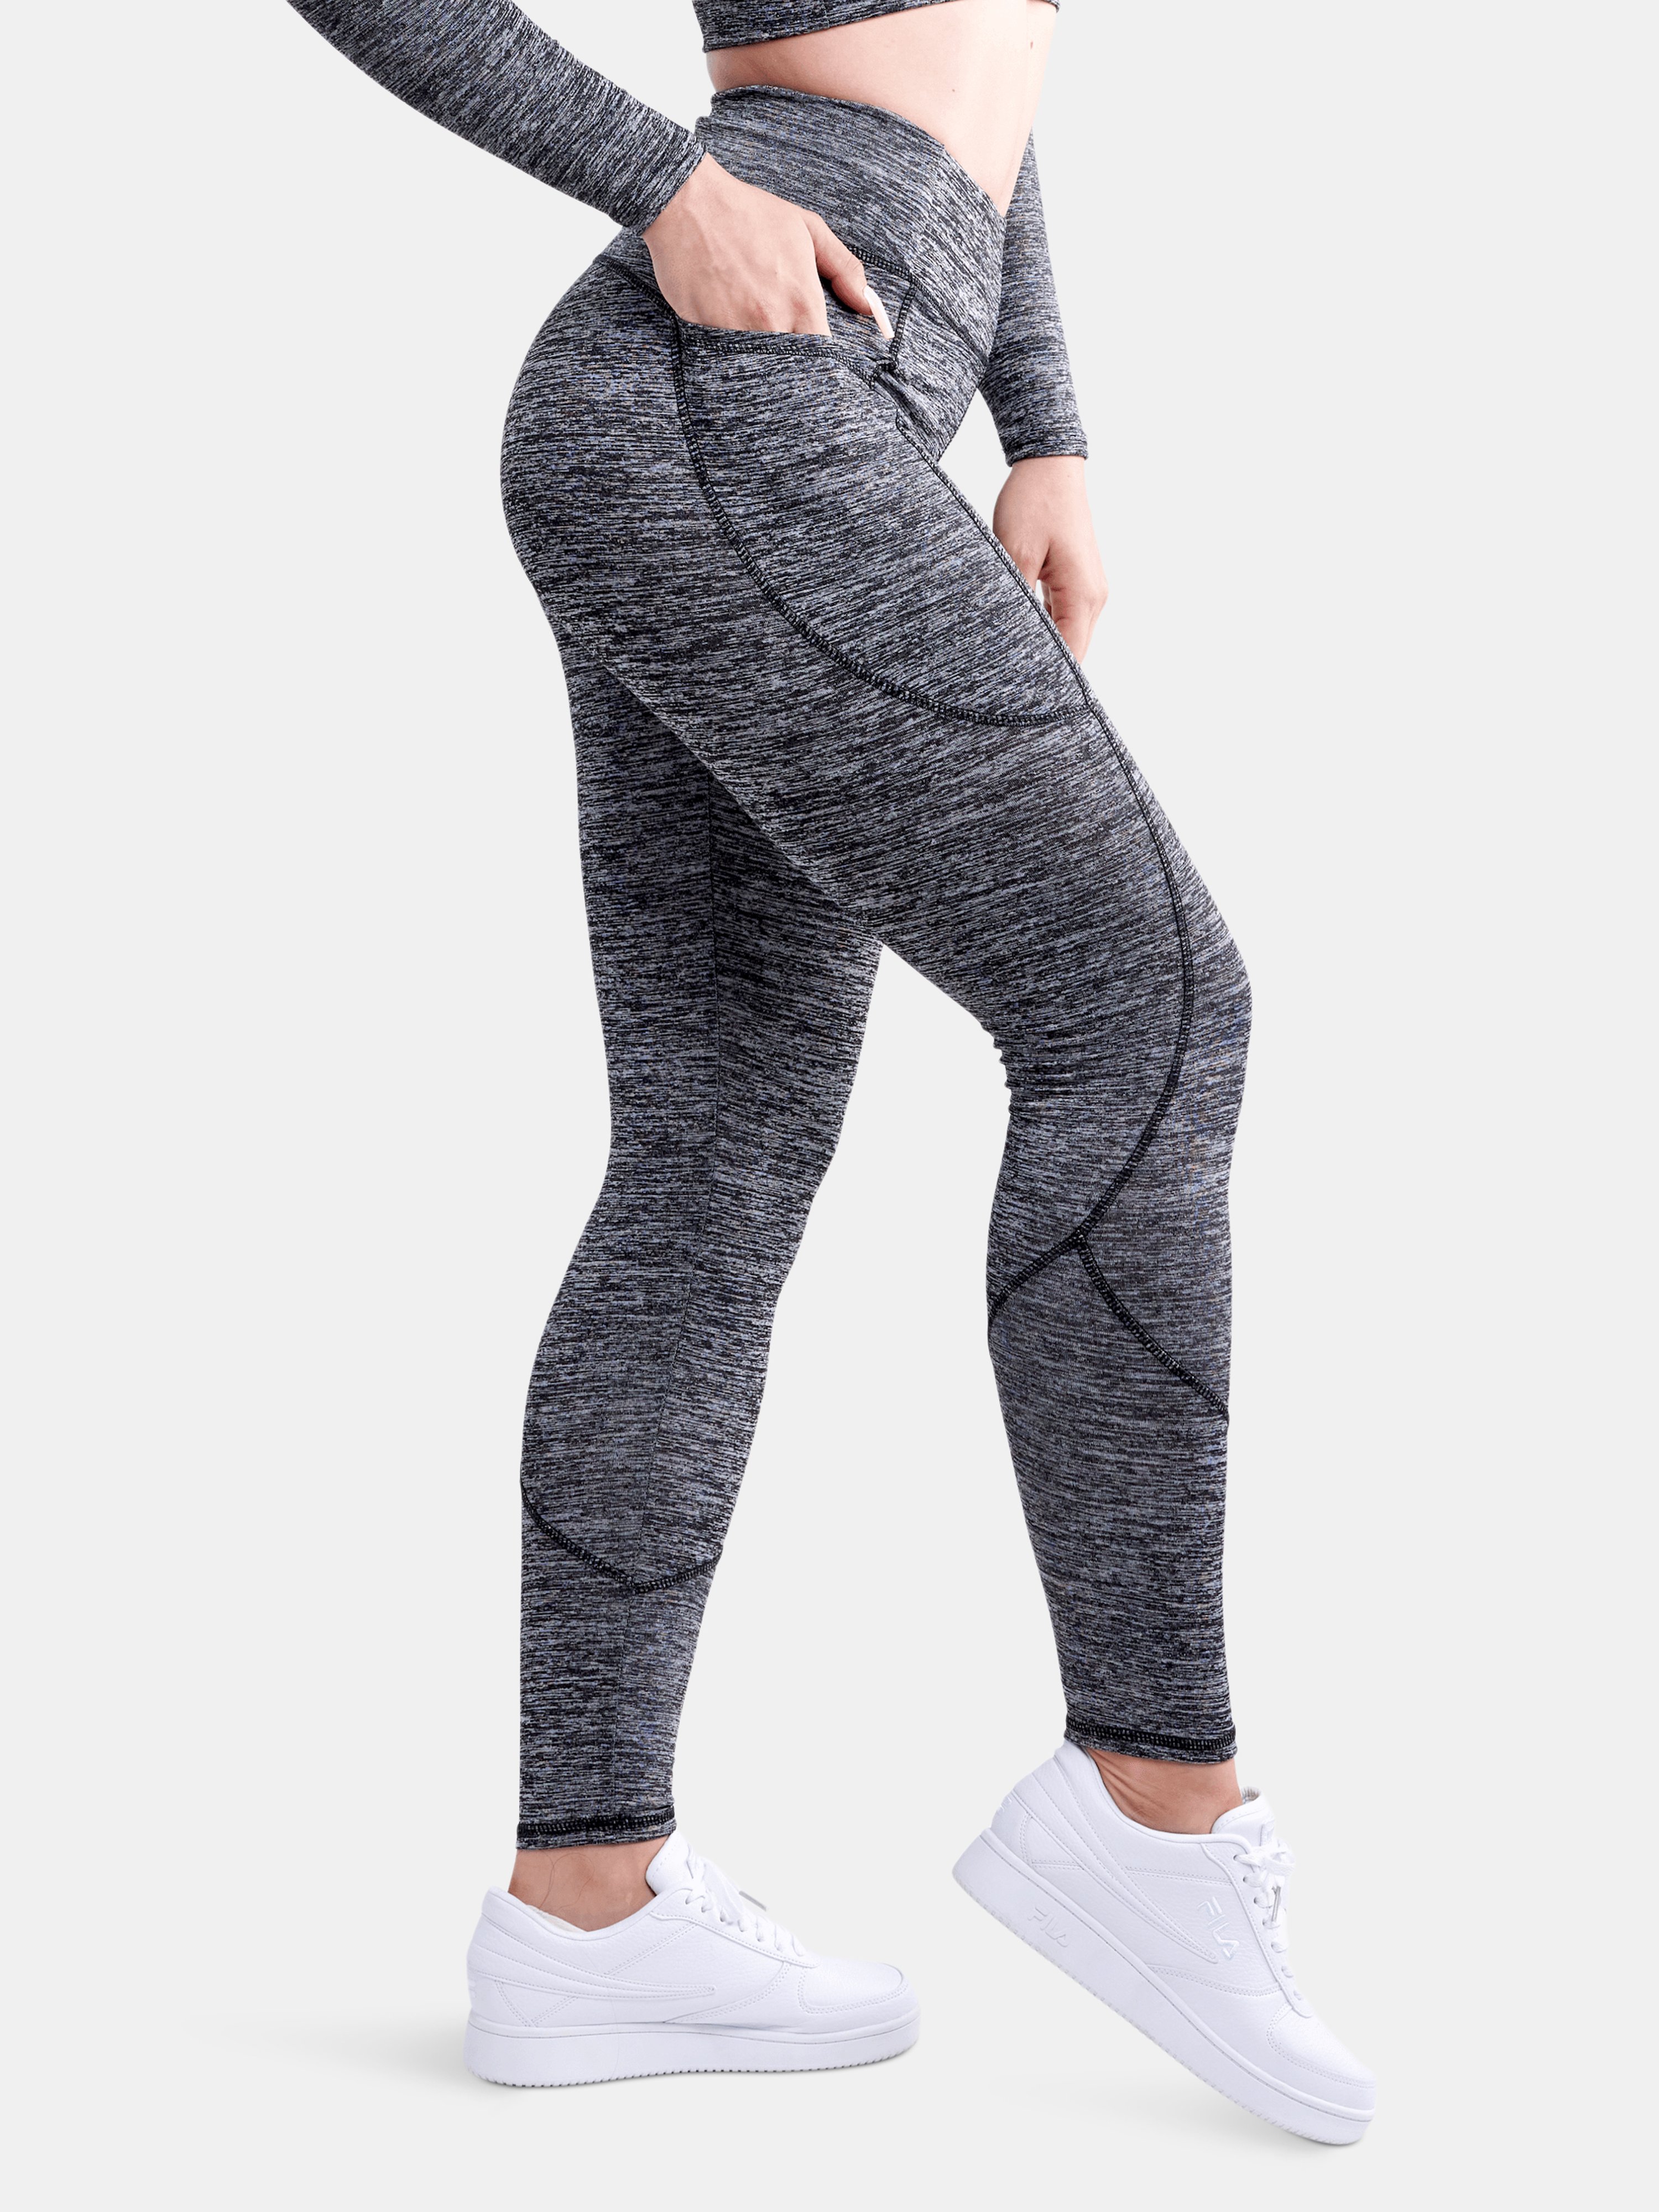 Jupiter Gear High-waisted Classic Gym Leggings With Side Pockets In Grey